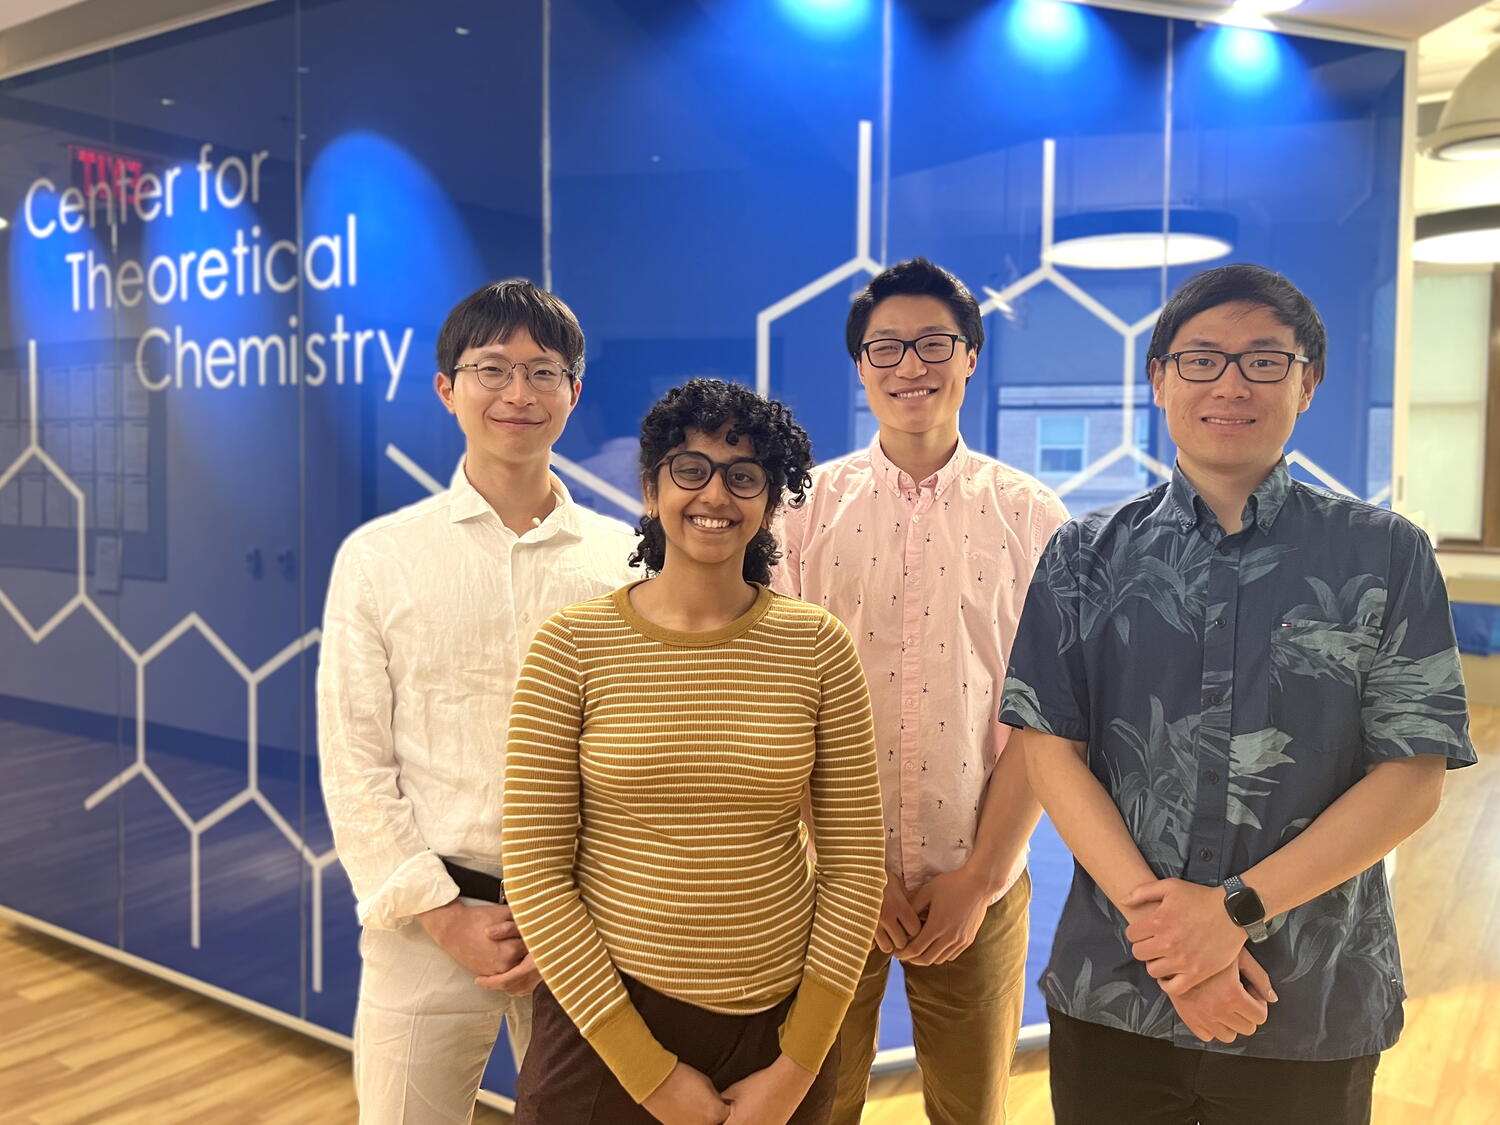 Four researchers stand side by side in front of a blue wall